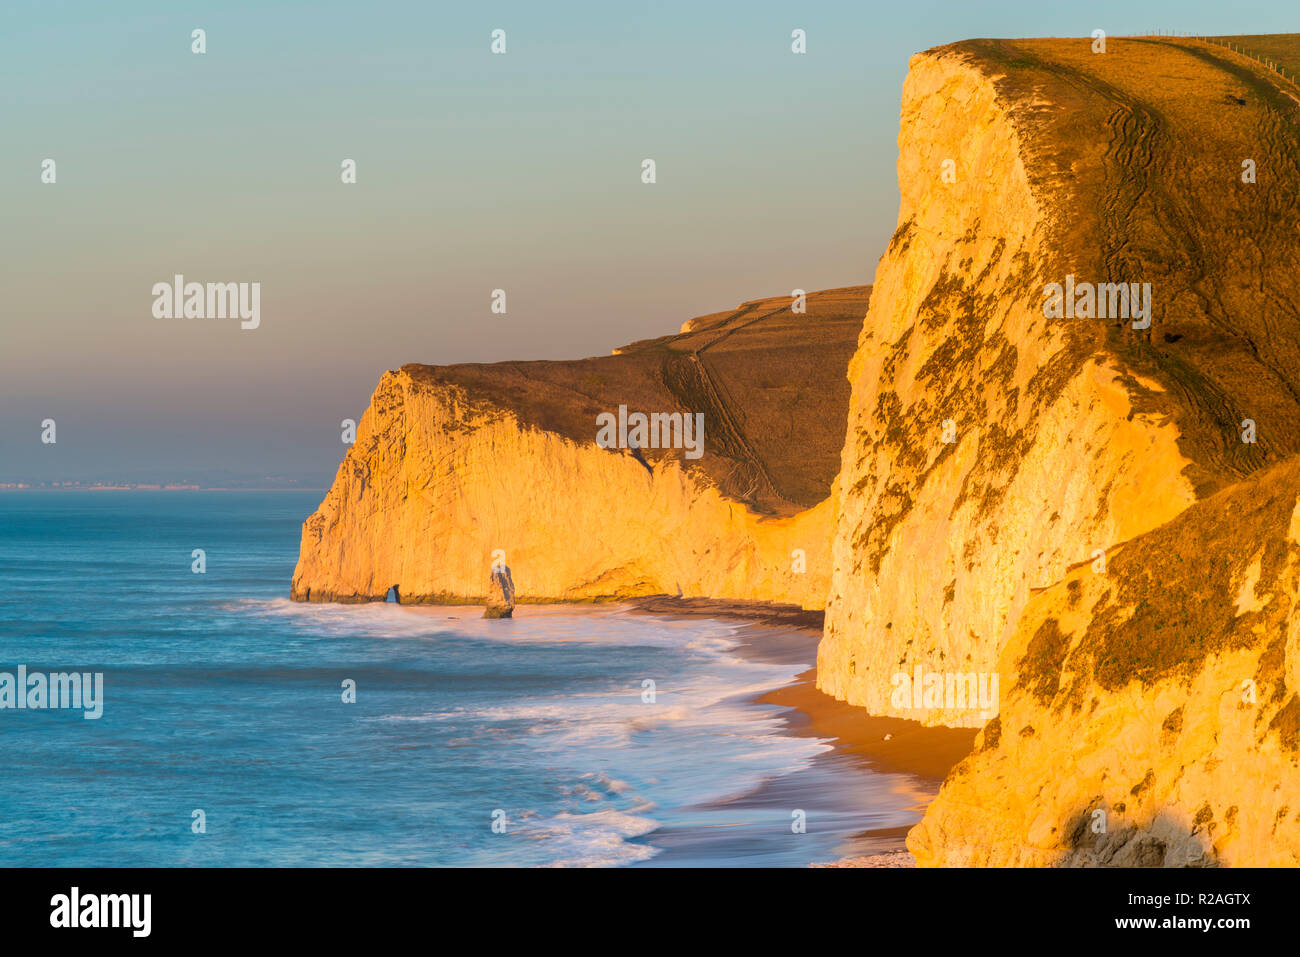 Lulworth, Dorset, UK.  18th November 2018.  The chalk cliffs of Swyre Head and Bats Head on the Jurassic Coast of Dorset near Lulworth glow in the early morning golden sunlight shortly after sunrise on a cold clear day.  Picture Credit: Graham Hunt/Alamy Live News. Stock Photo